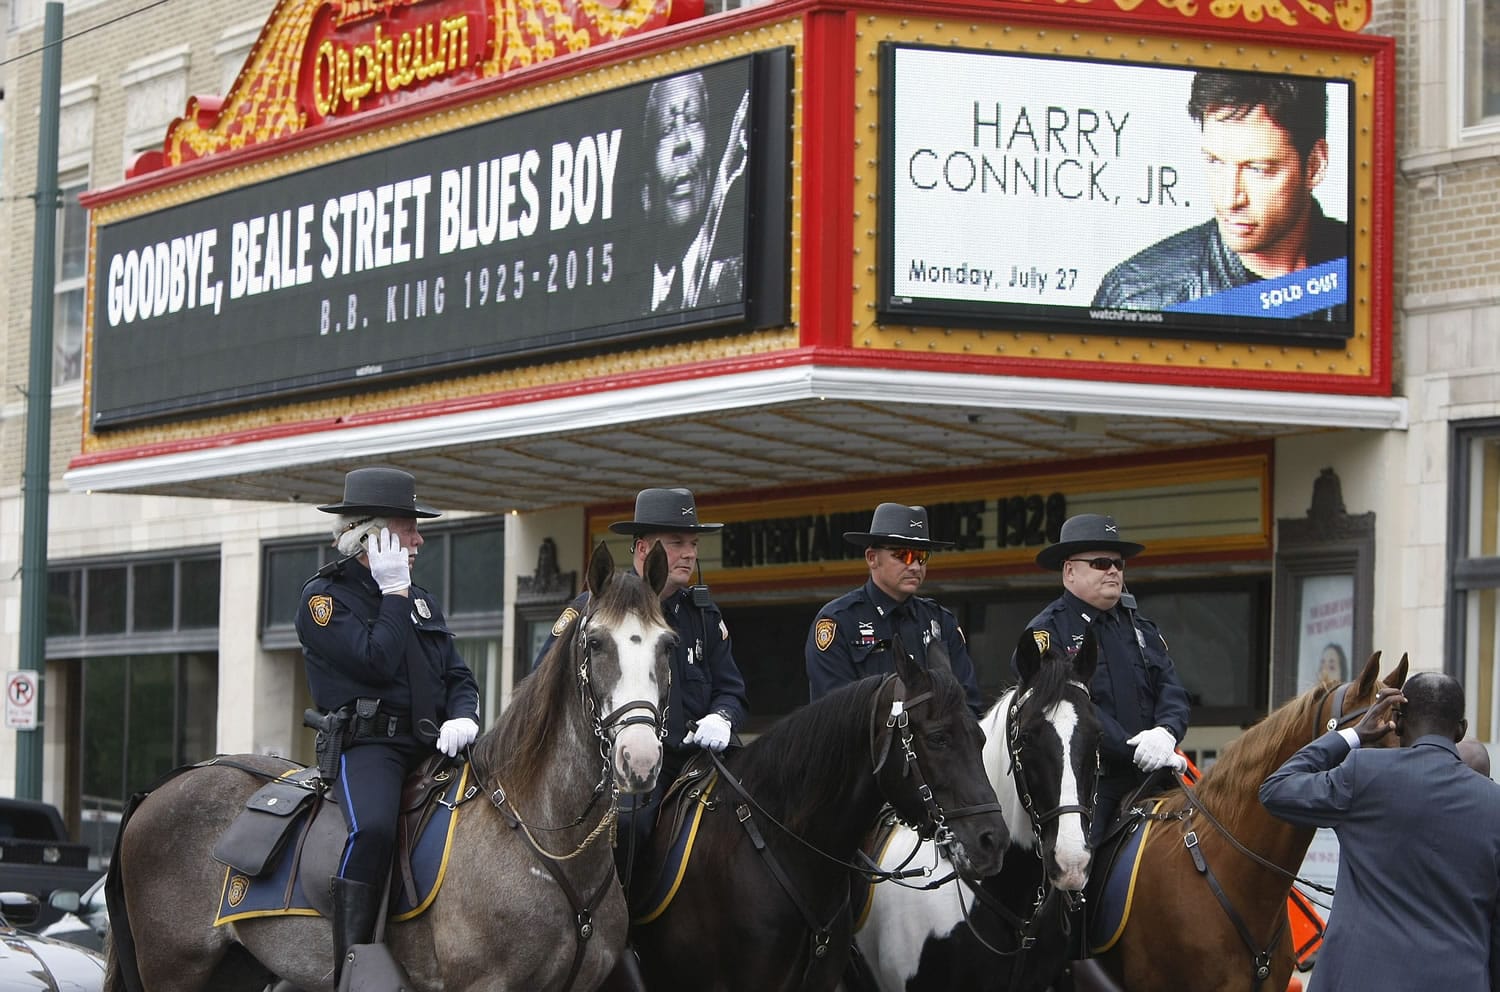 A mounted honor guard of the Memphis Police lines up for a funeral procession for B.B. King on Beale Street in Memphis, Tenn., on Wednesday. Thousands lined the street as the hearse carrying King passed. King, who was given the nickname Beale Street Blues Boy, died May 14 in Las Vegas.